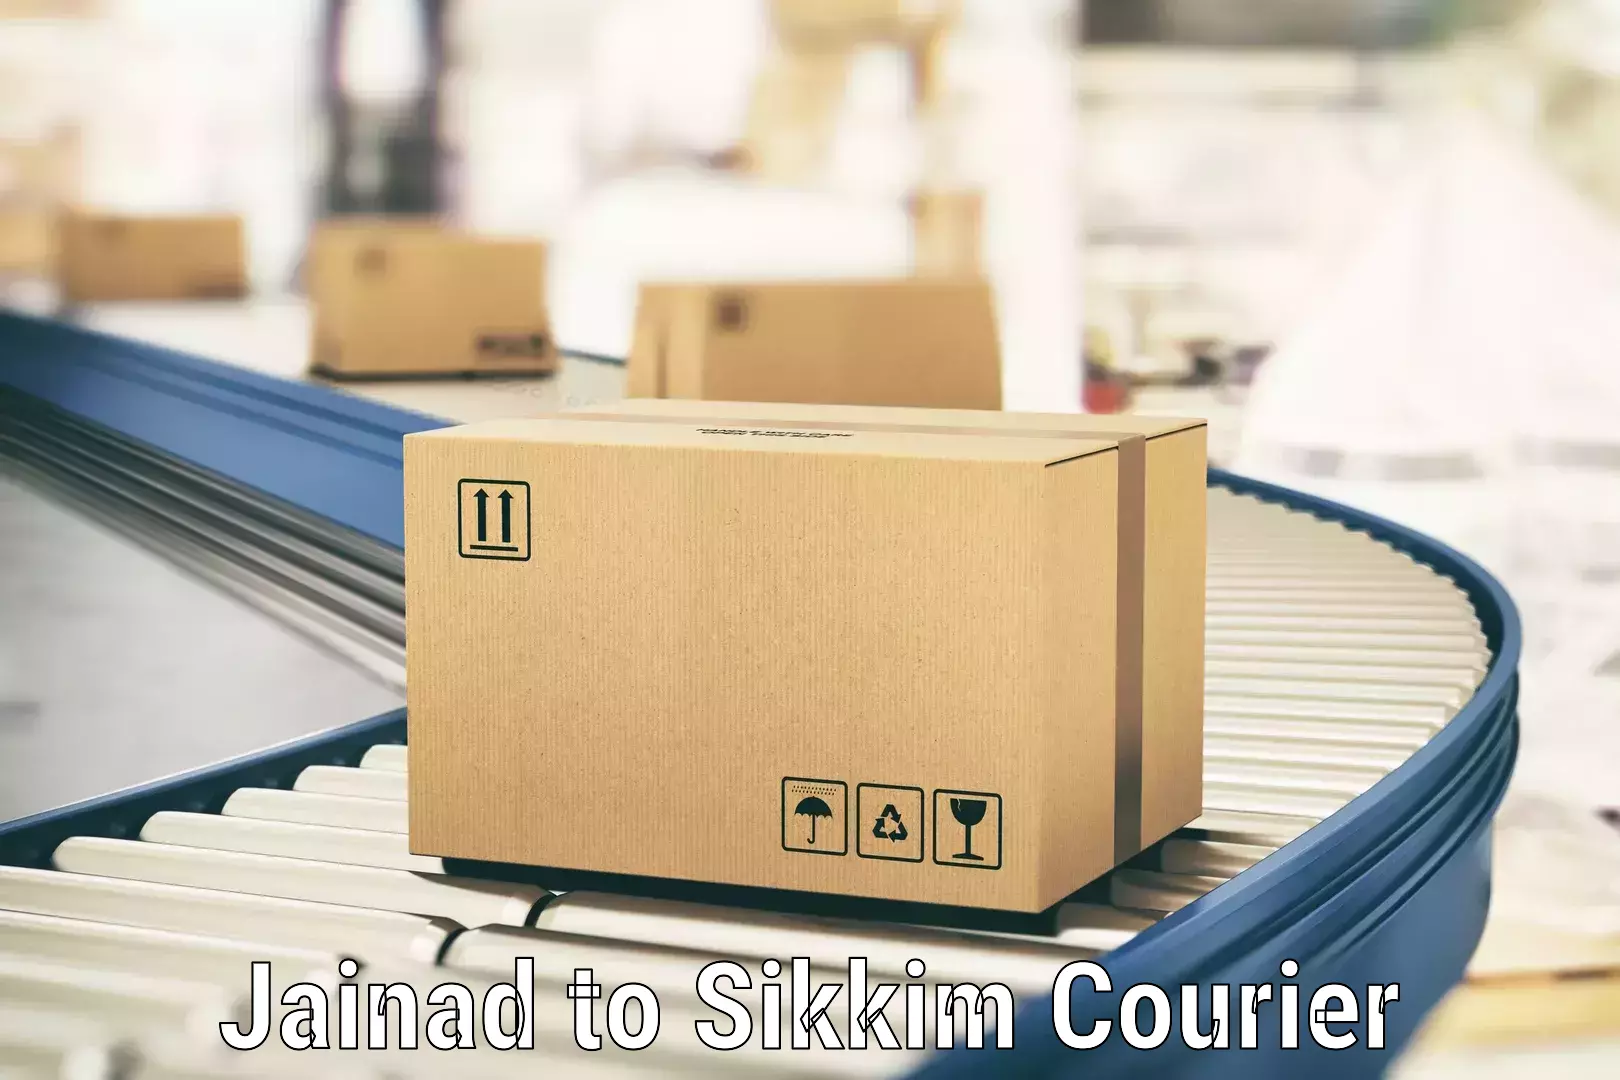 Same-day delivery options Jainad to East Sikkim